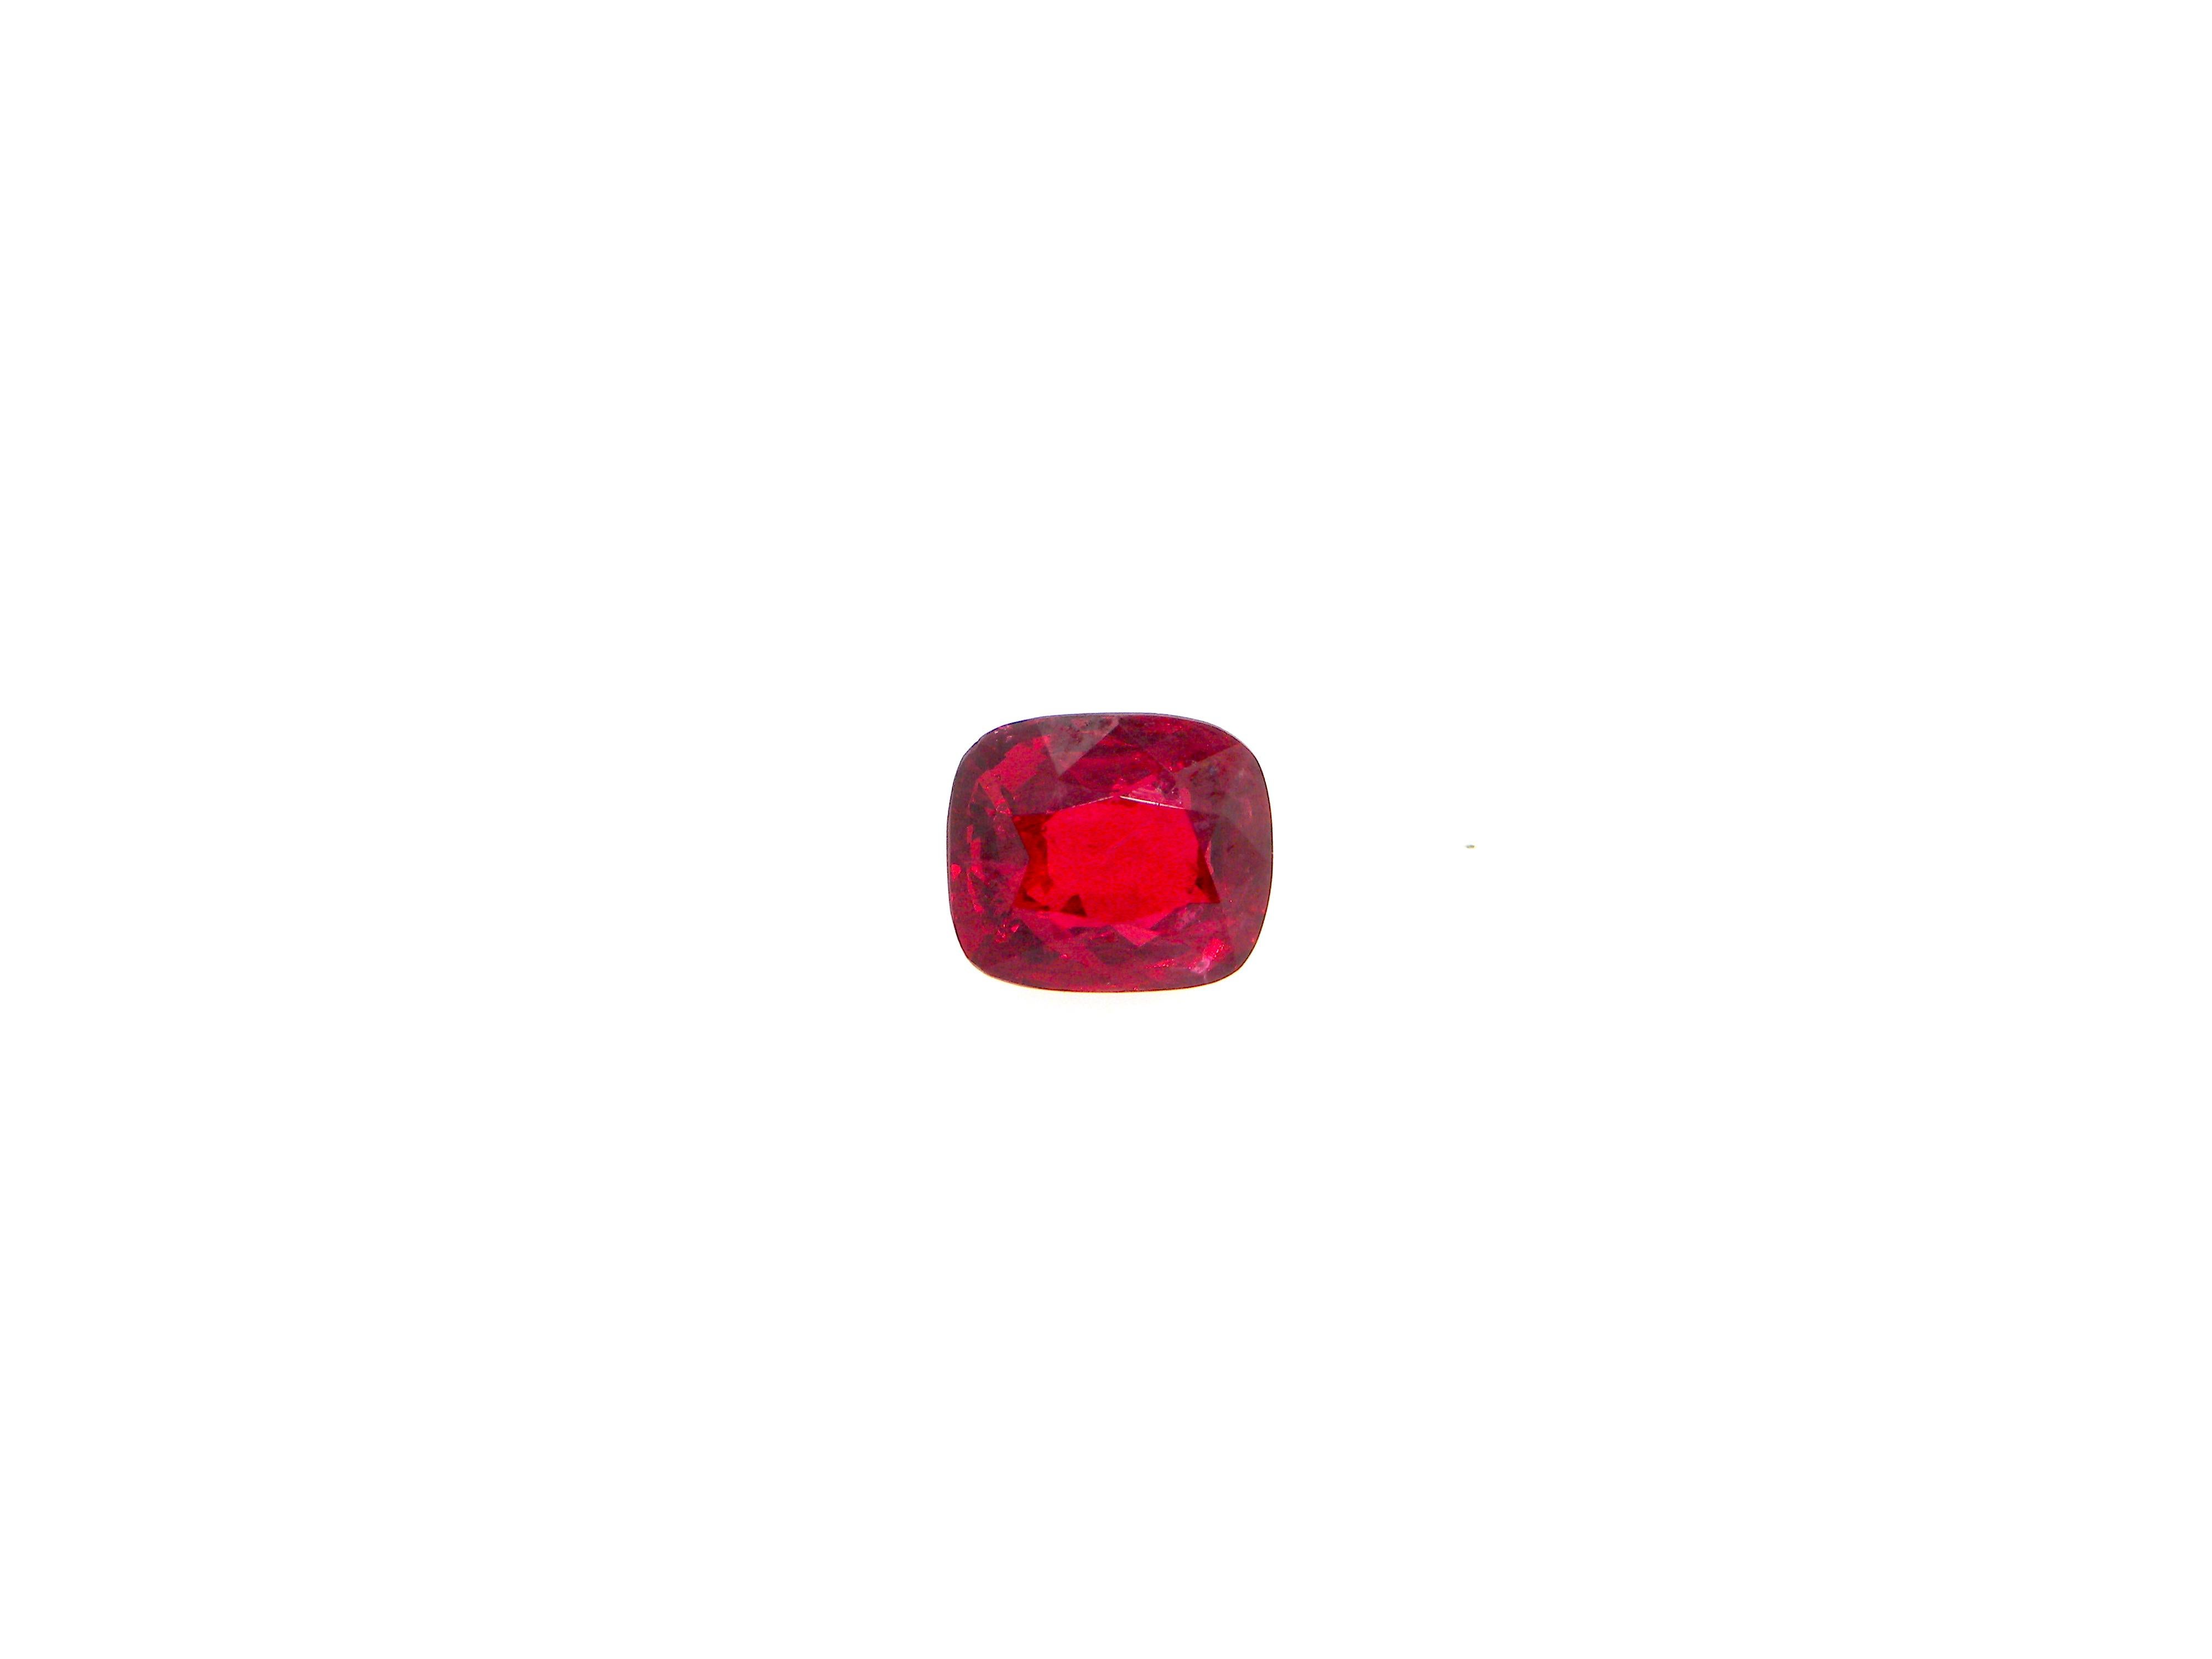 1.46 Carat GRS Certified Unheated Cushion-Cut Burmese Vivid Red Spinel:   

A gorgeous and rare gem, it is a 1.46 carat GRS certified unheated cushion-cut Burmese vivid red spinel. Hailing from the historic Mogok mines in Burma as certified by GRS